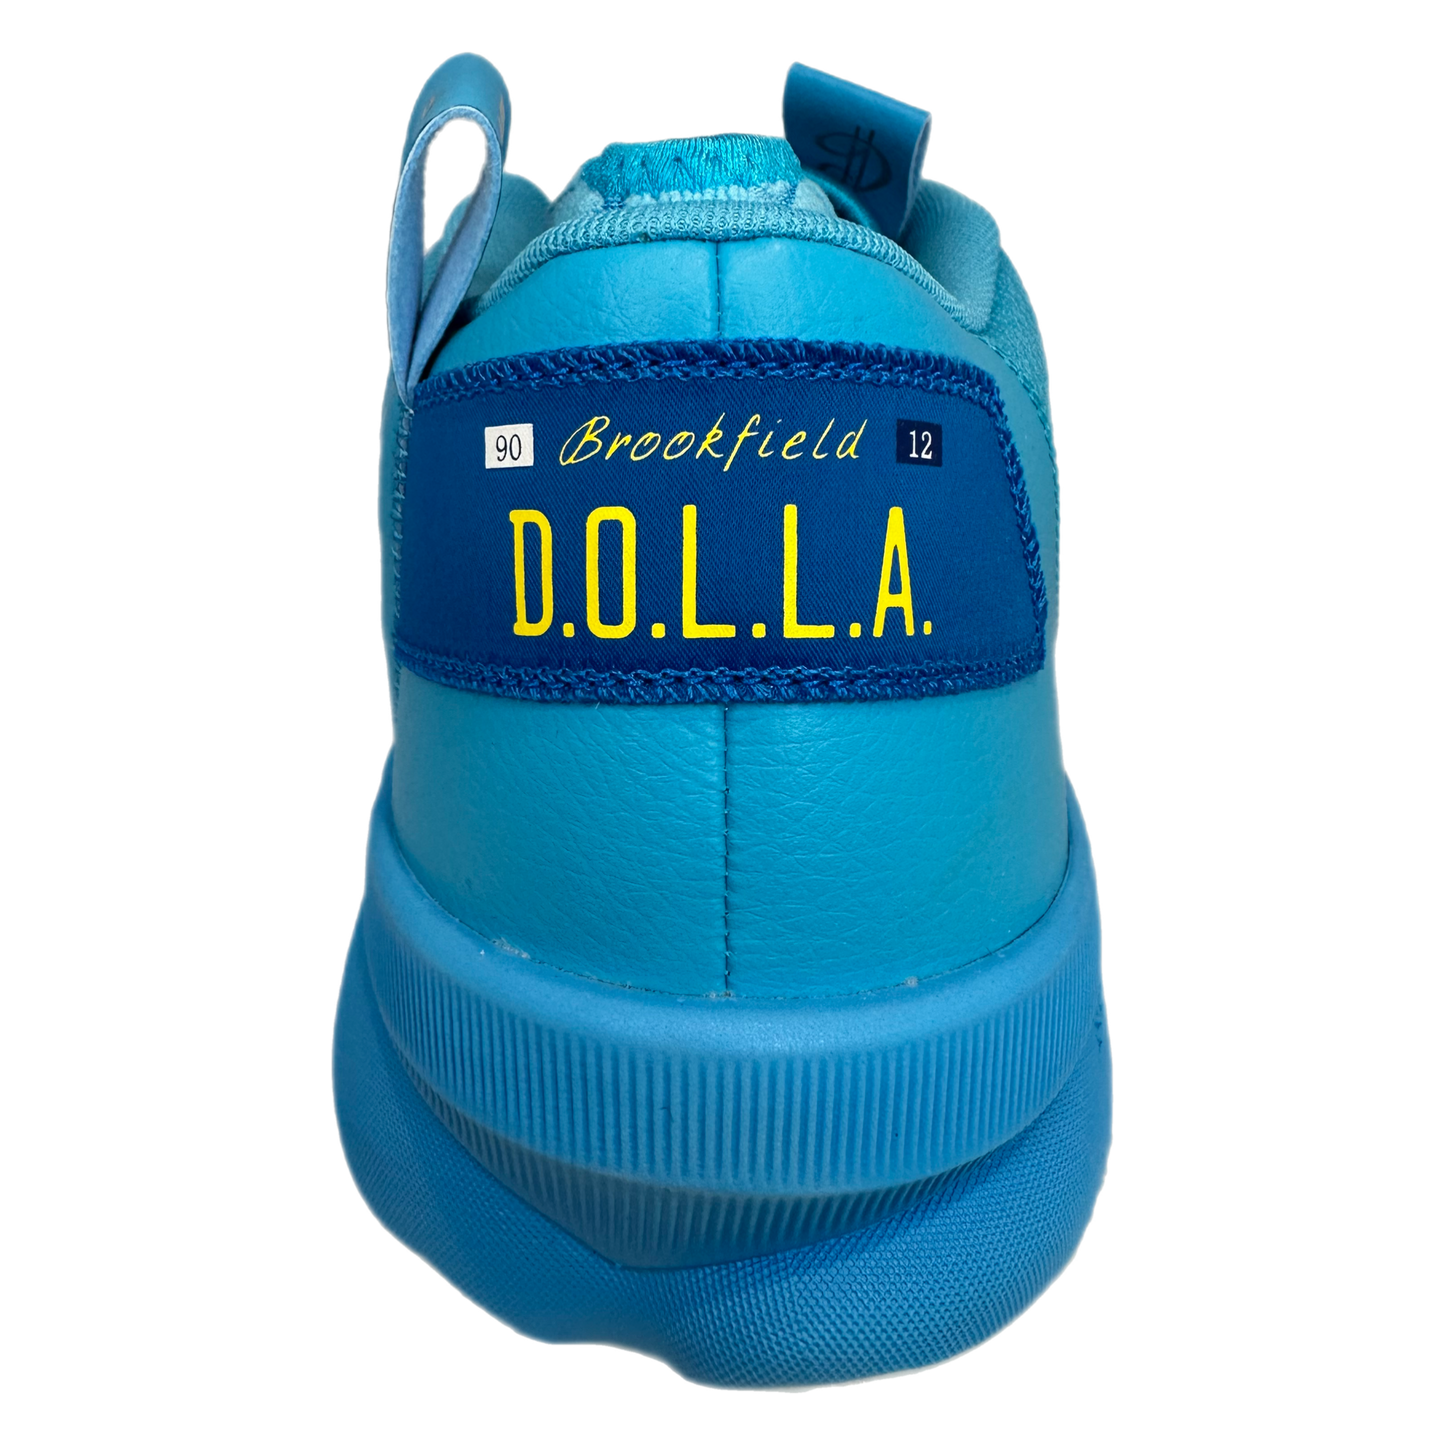 Adidas - "Dame 8 Young Dolla" -Size 14